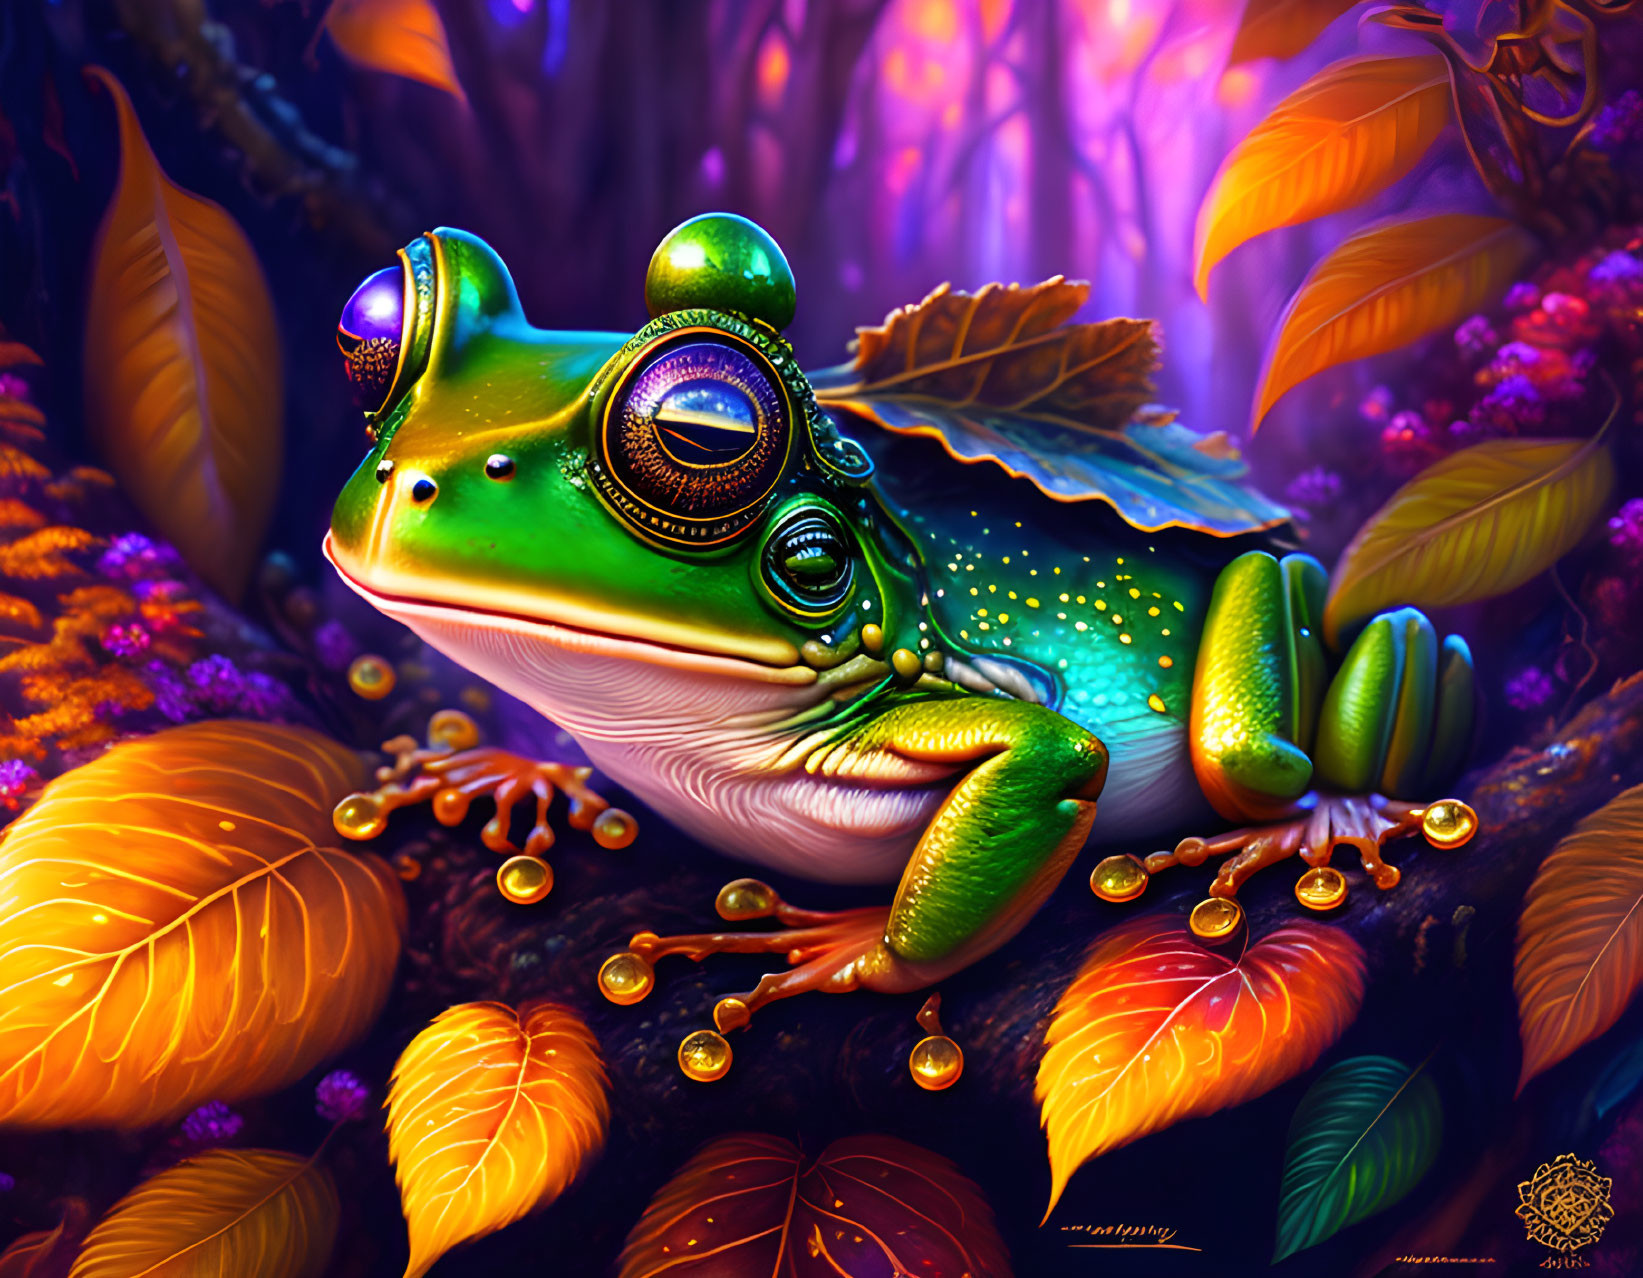 Frog In The Leaves